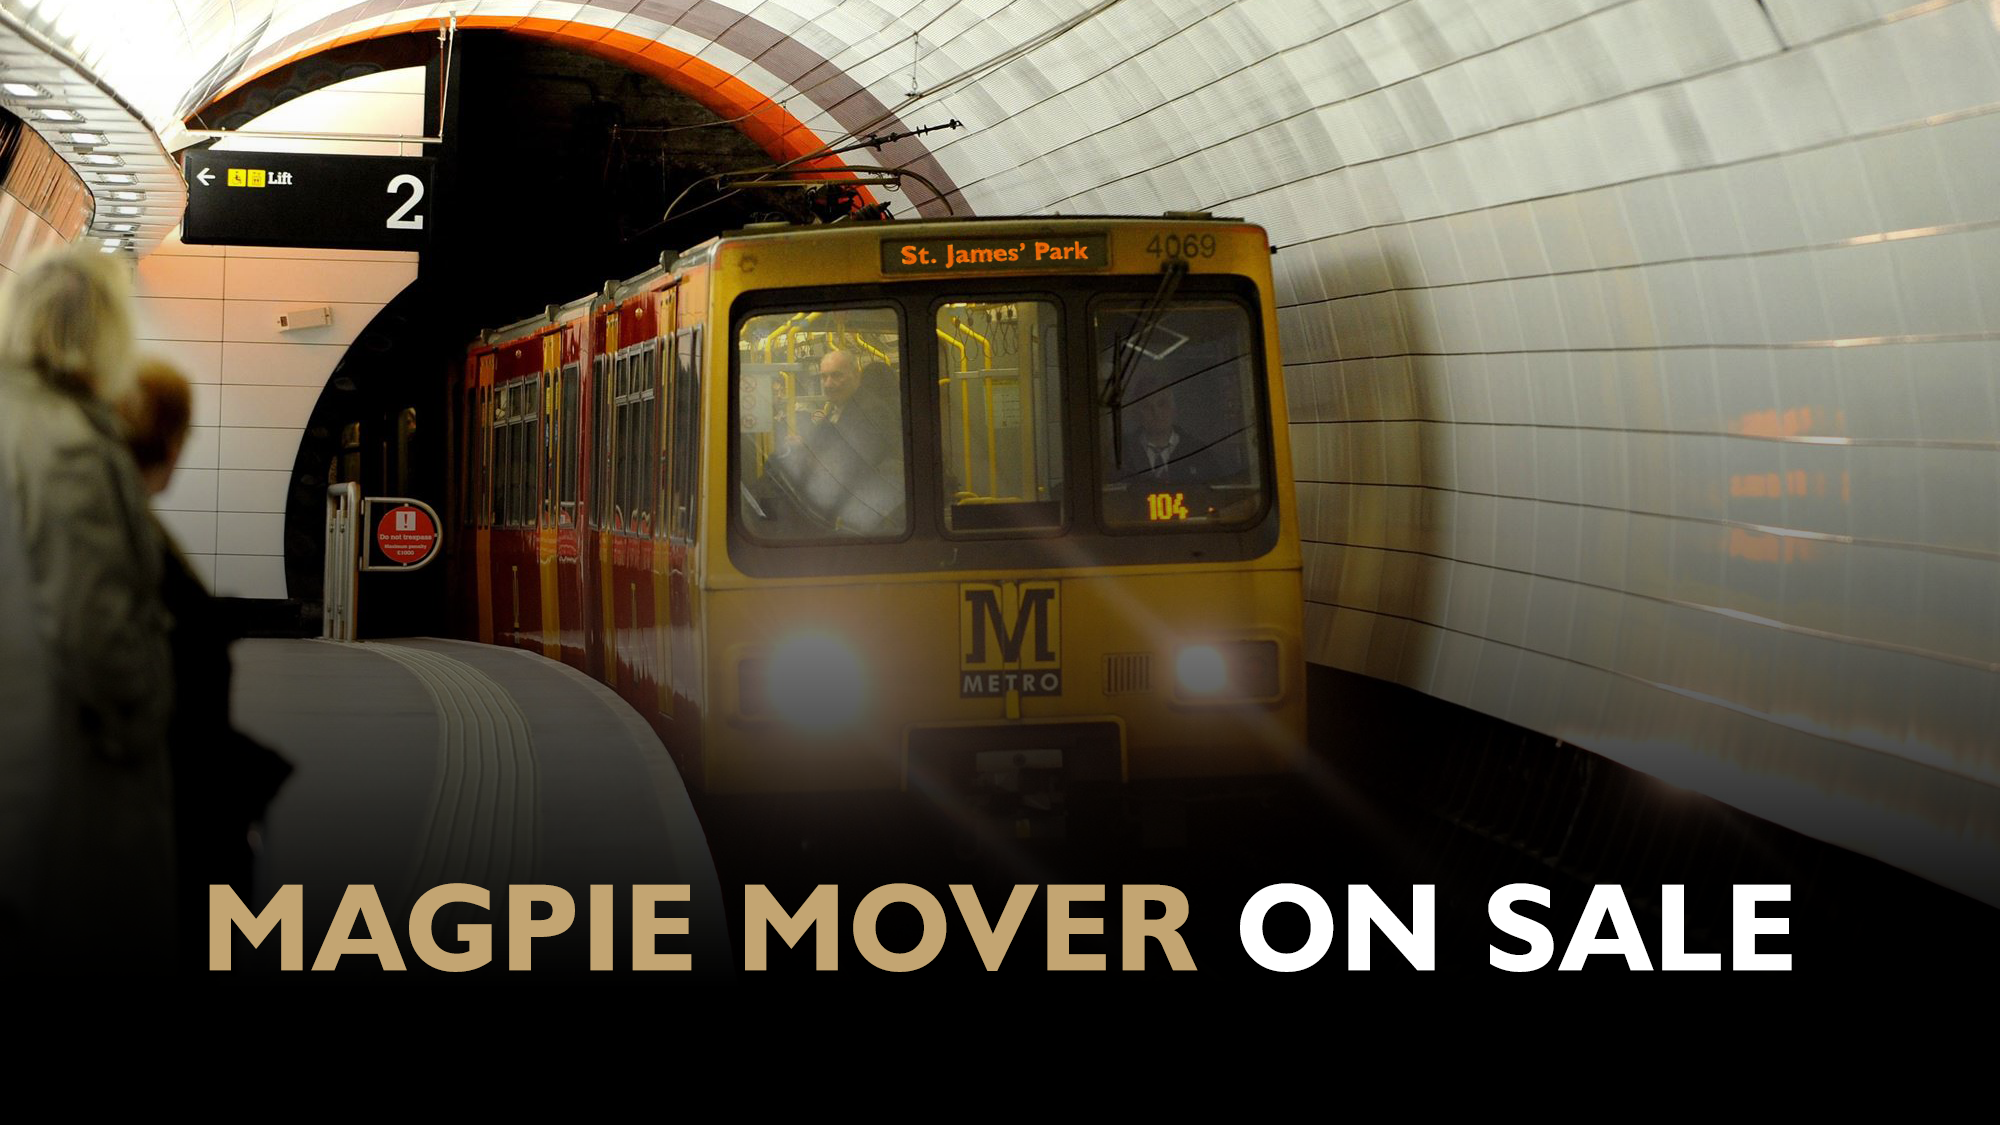 Magpie Mover on sale: Buy now